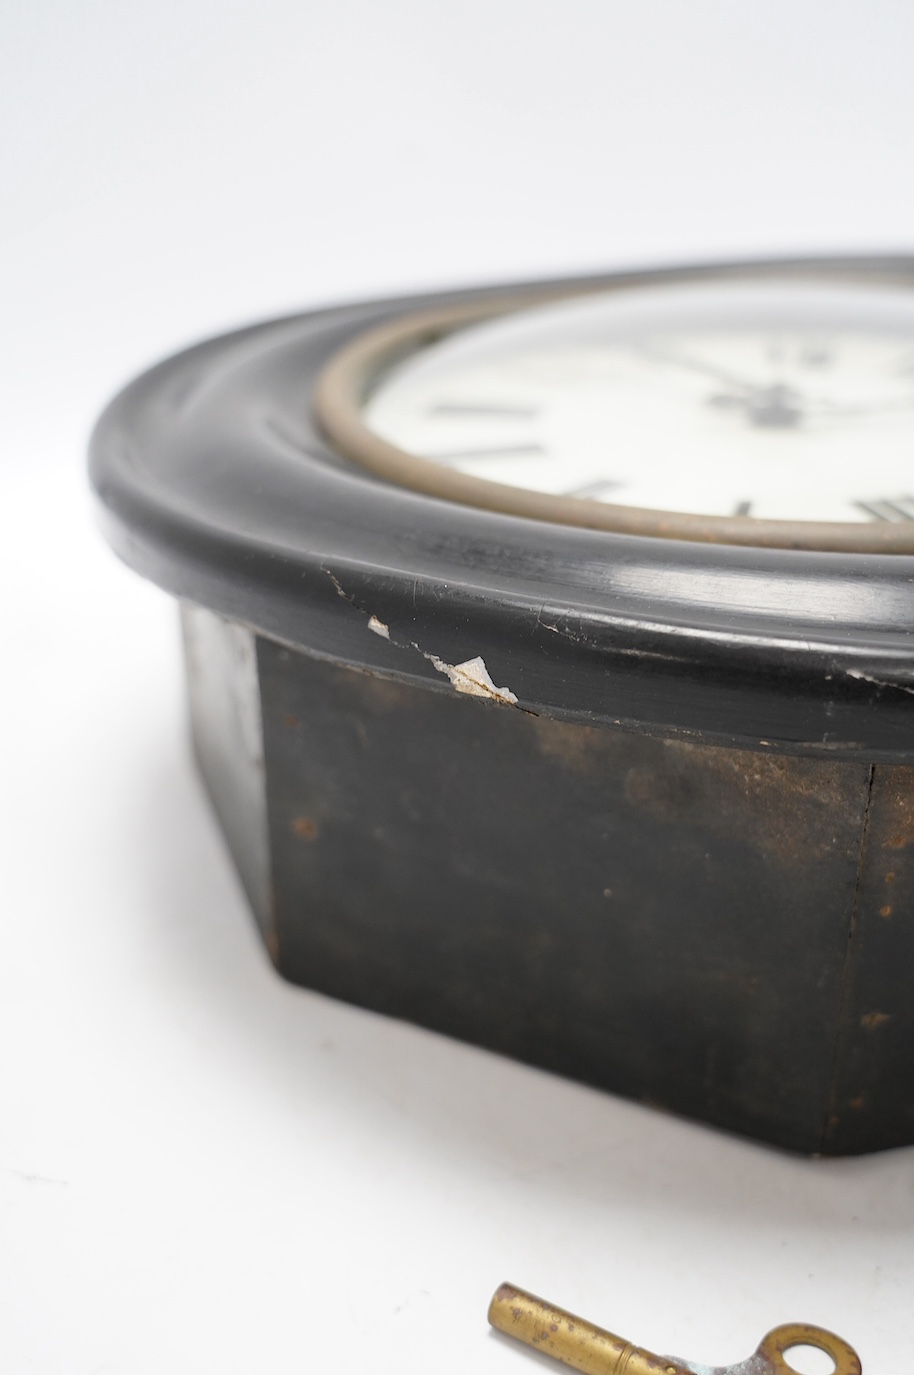 A late 19th century circular wall timepiece, dial 24.5cm. Condition - poor